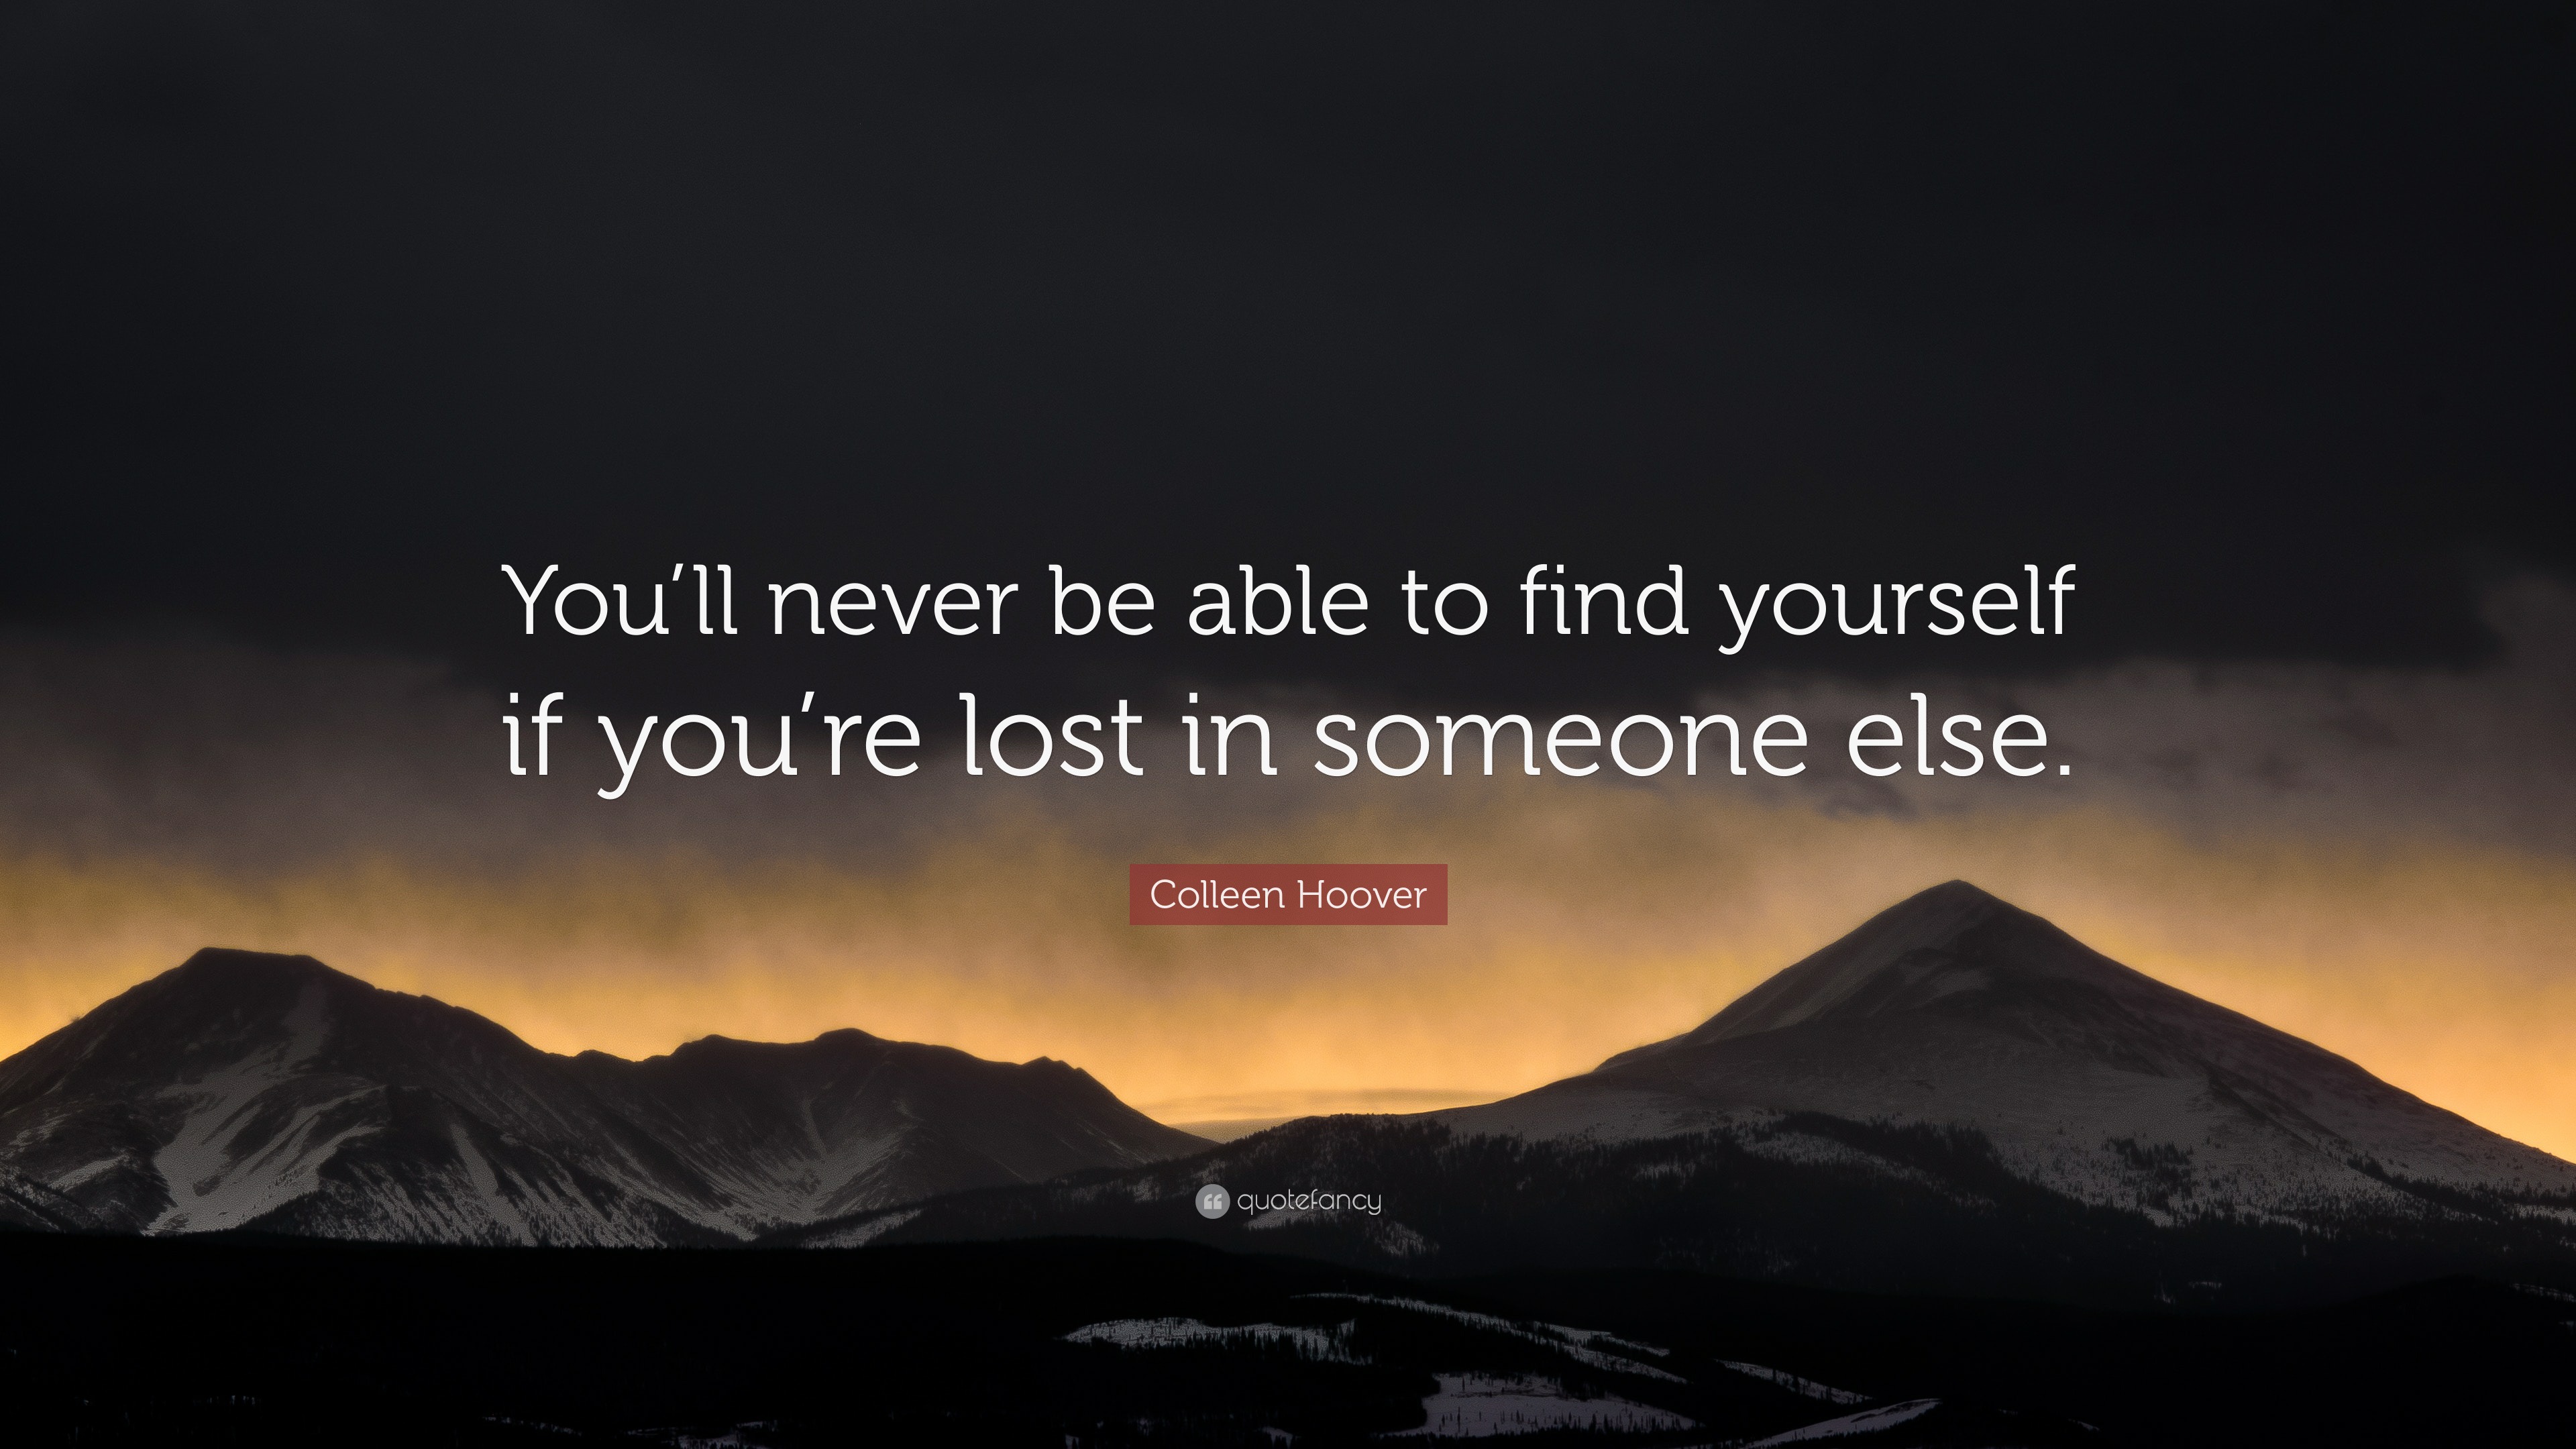 Colleen Hoover Quote “you’ll Never Be Able To Find Yourself If You’re Lost In Someone Else ”